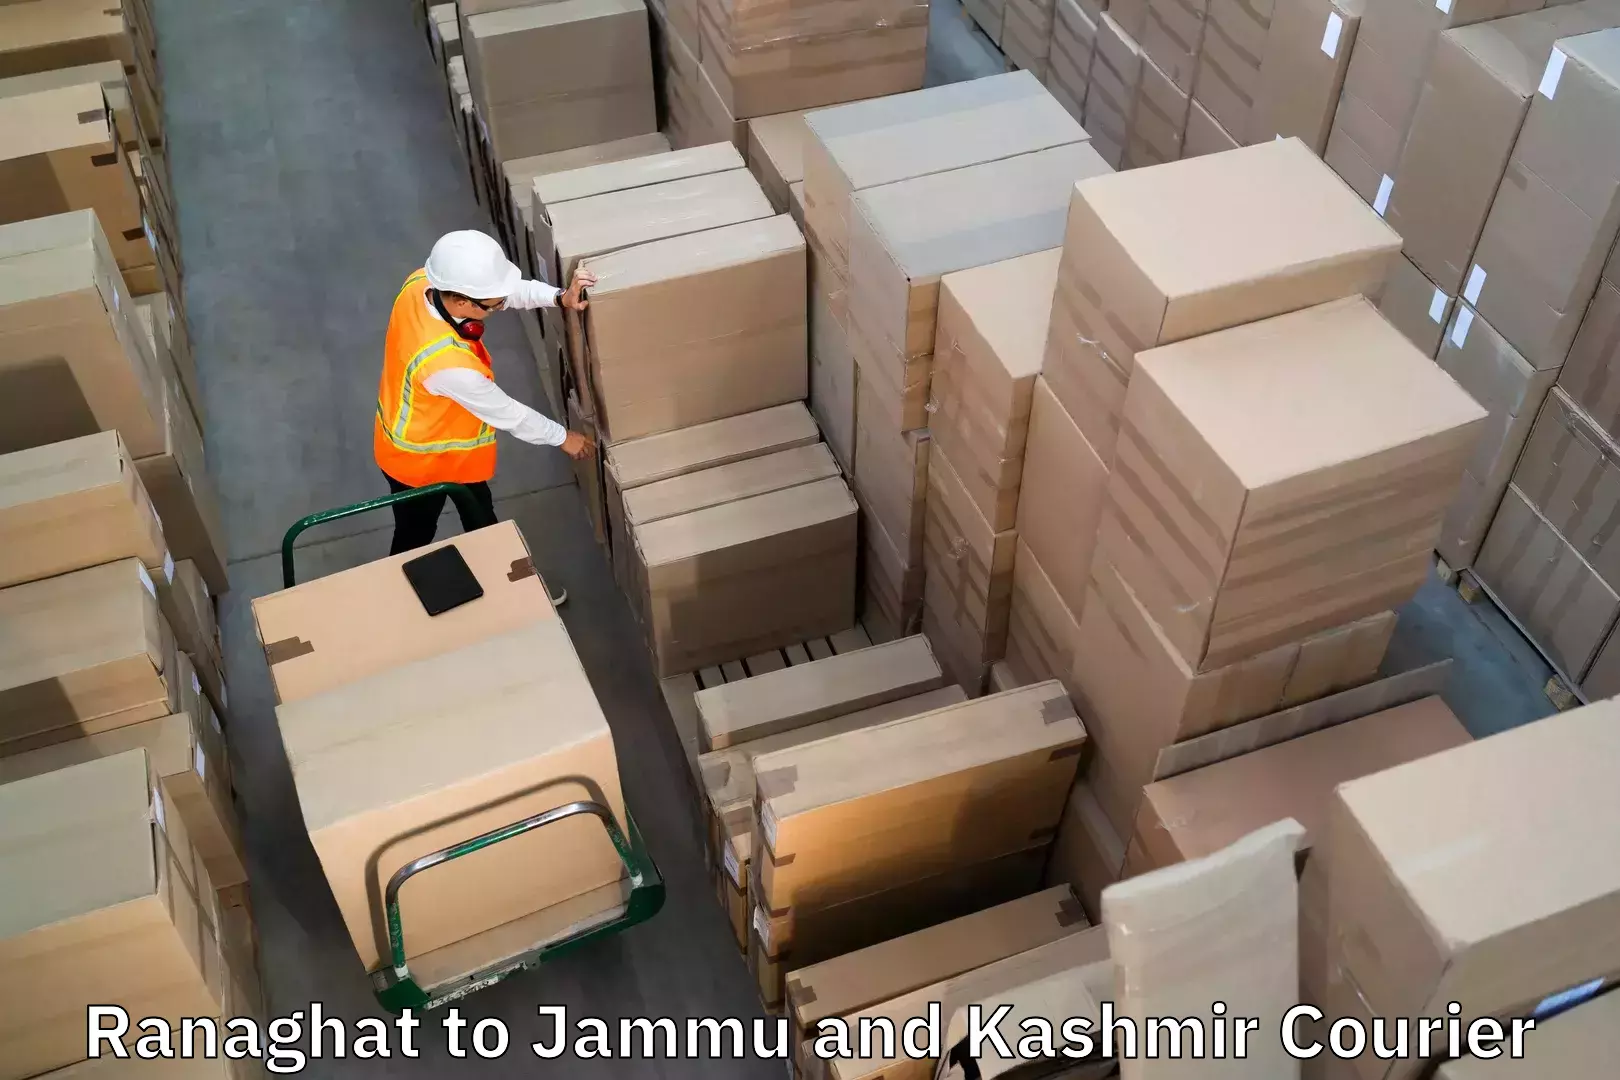 Baggage relocation service Ranaghat to Rajouri